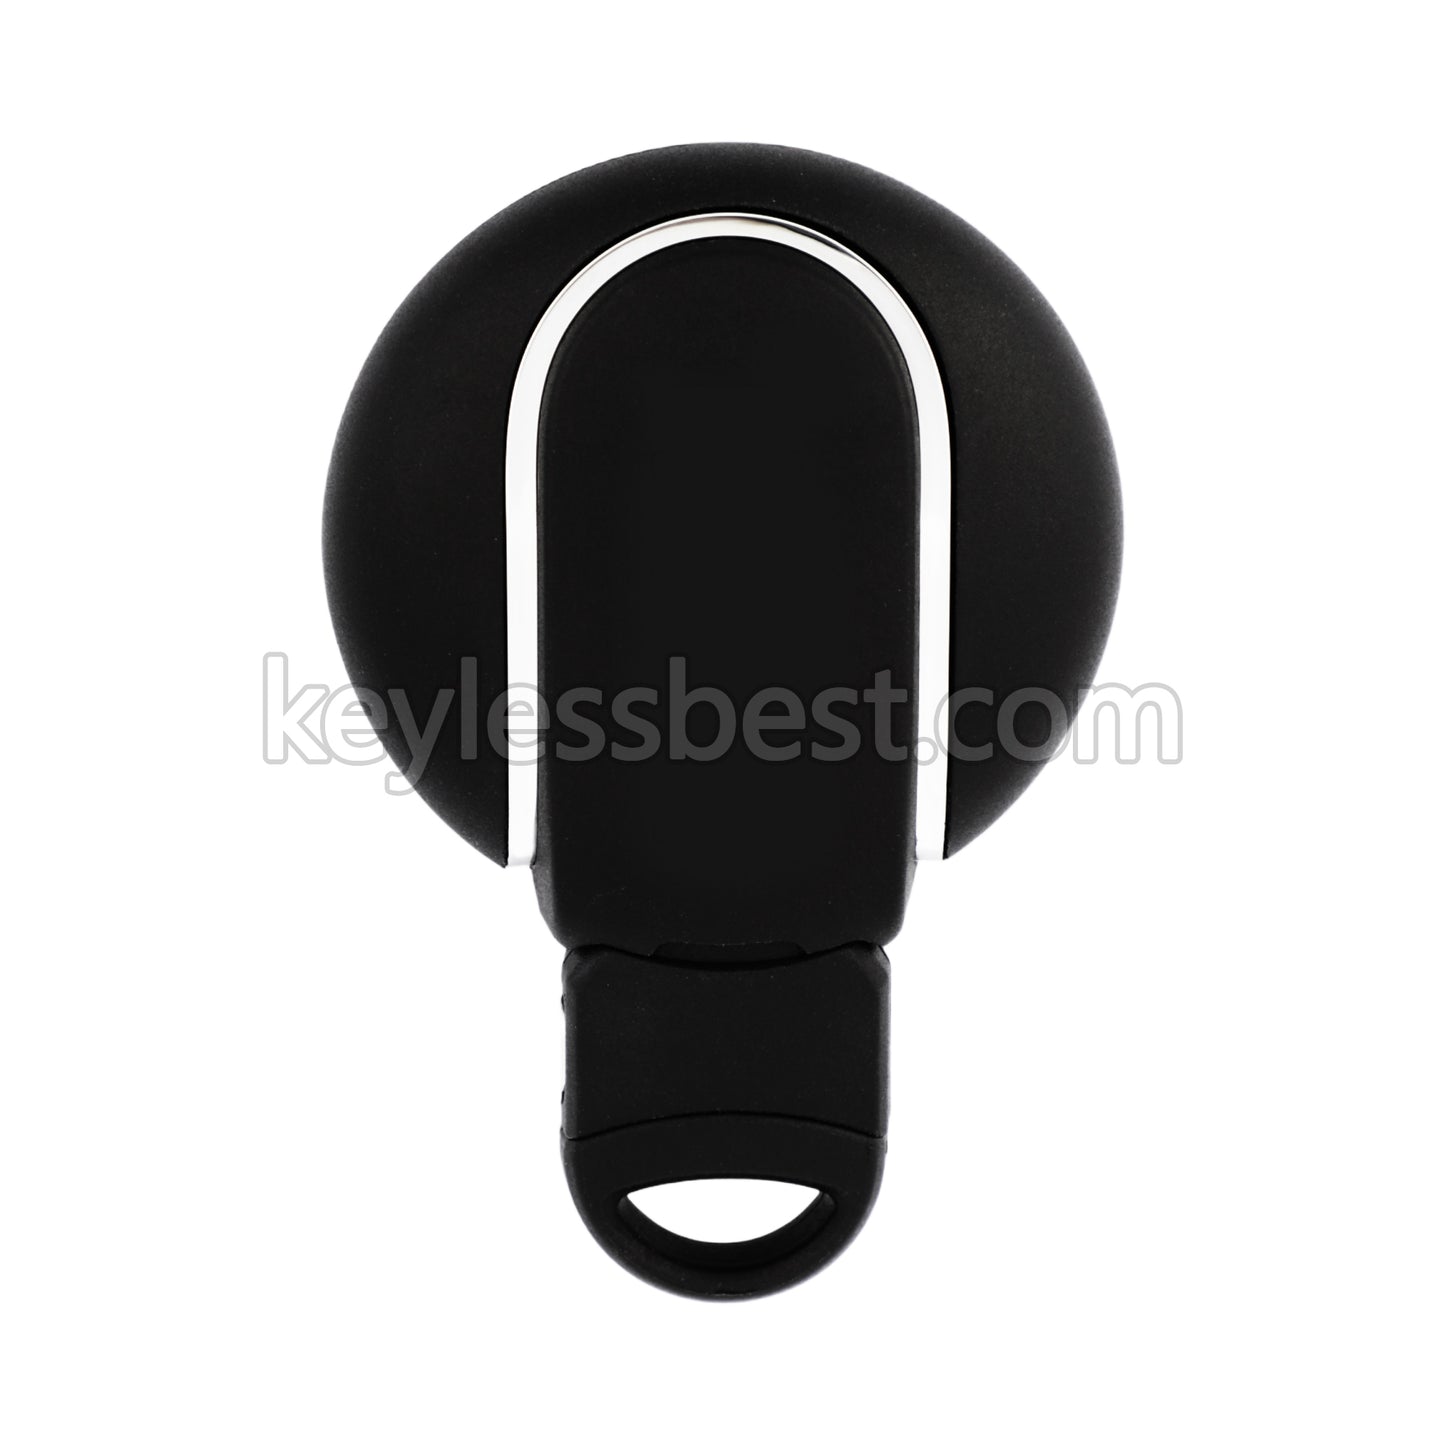 2014-2018 Mini Cooper / 4 Buttons Remote Key / NBGIDGNG1 / 315MHz